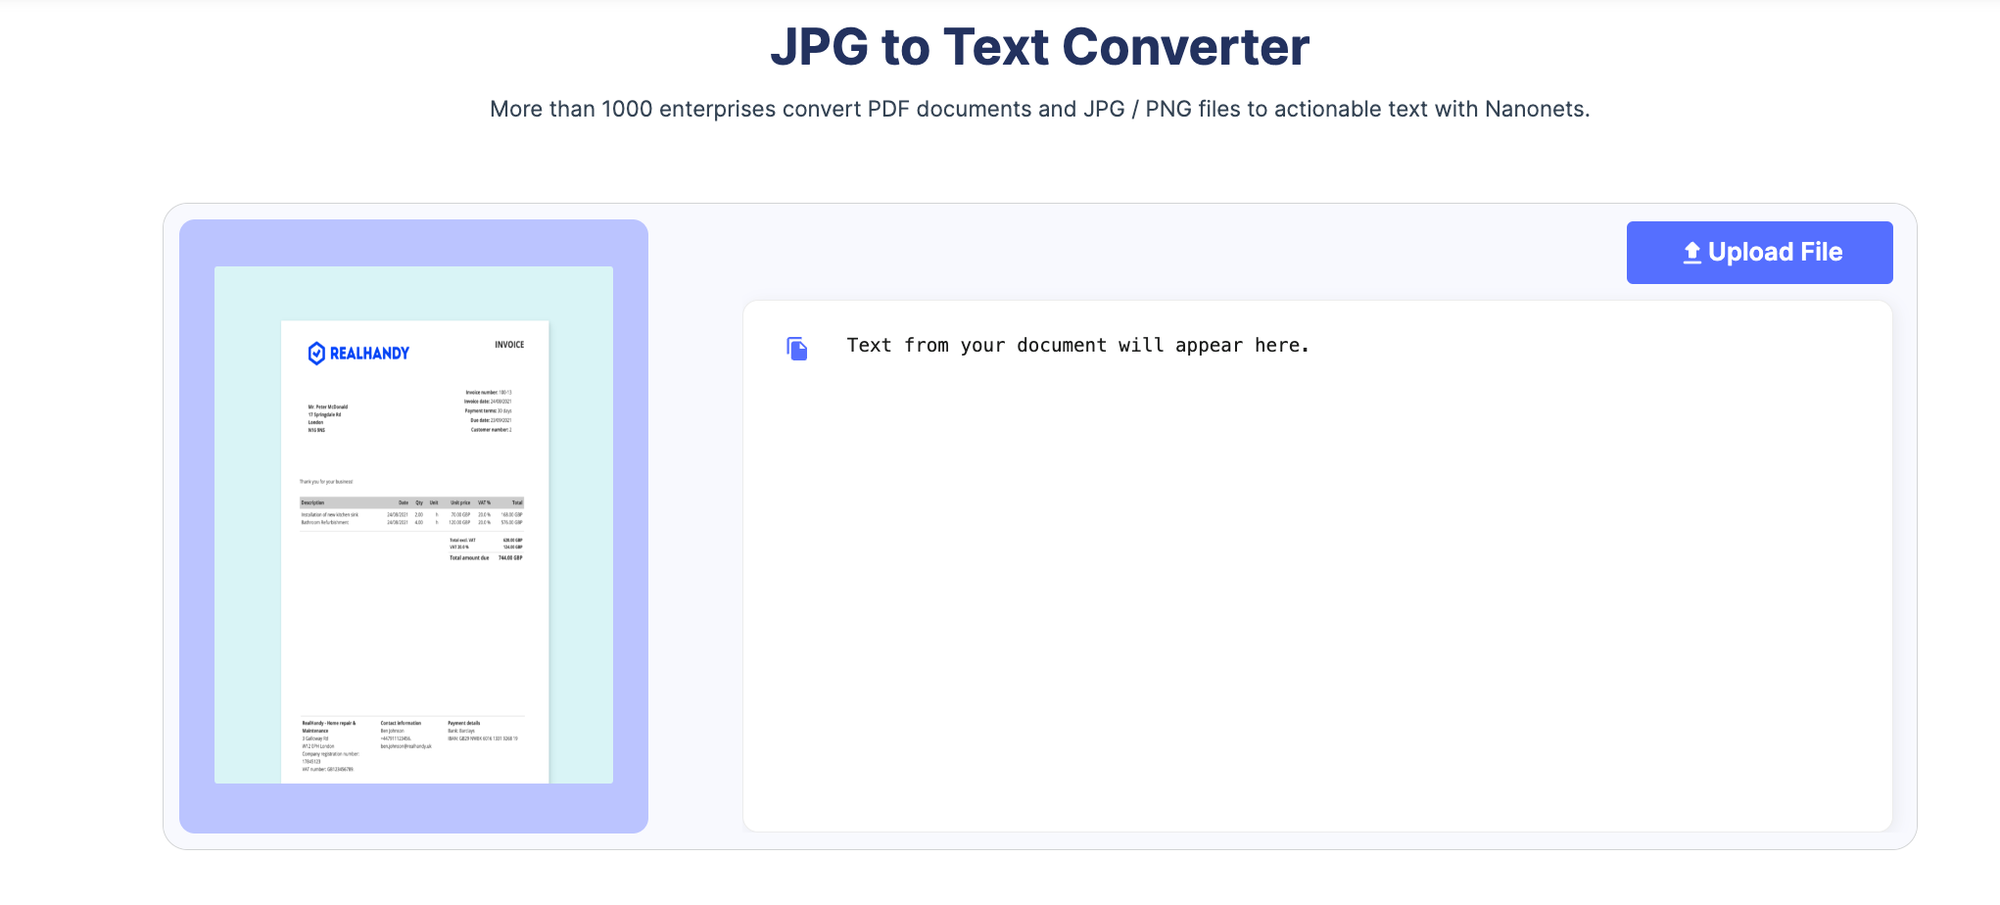 Fast and Easy Way to Convert Images into Text